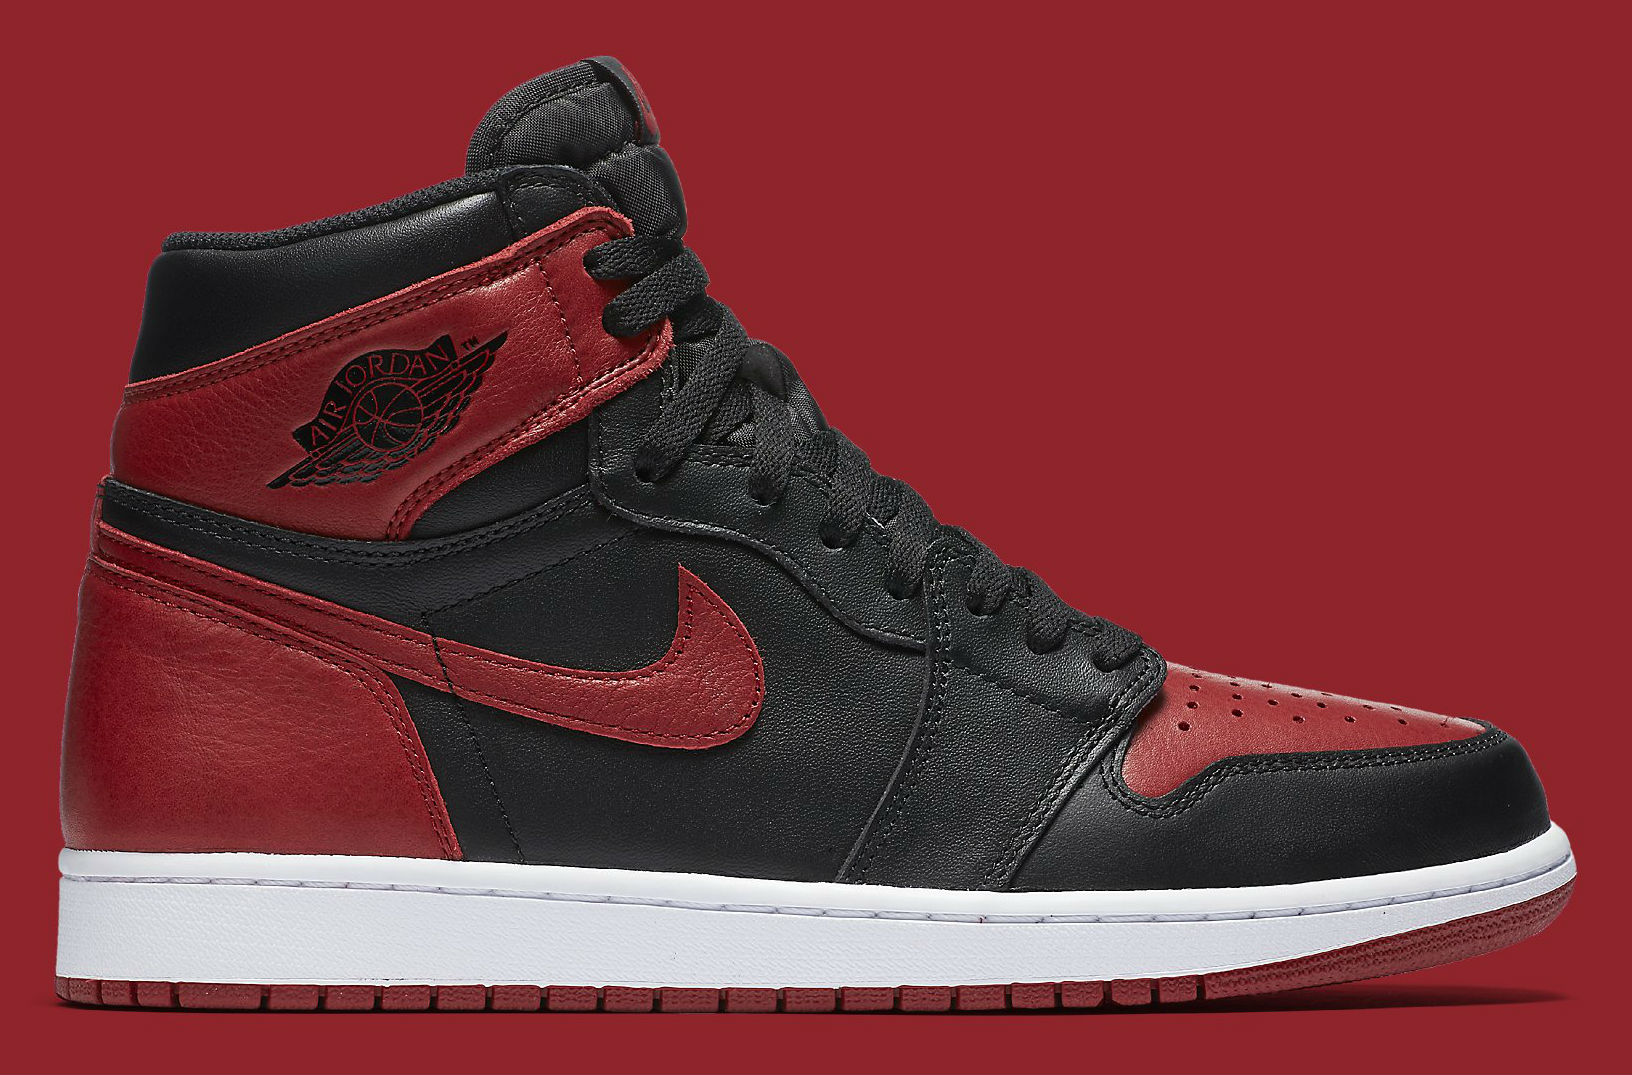 Air Jordan 1 Banned 555088-001 | Sole Collector